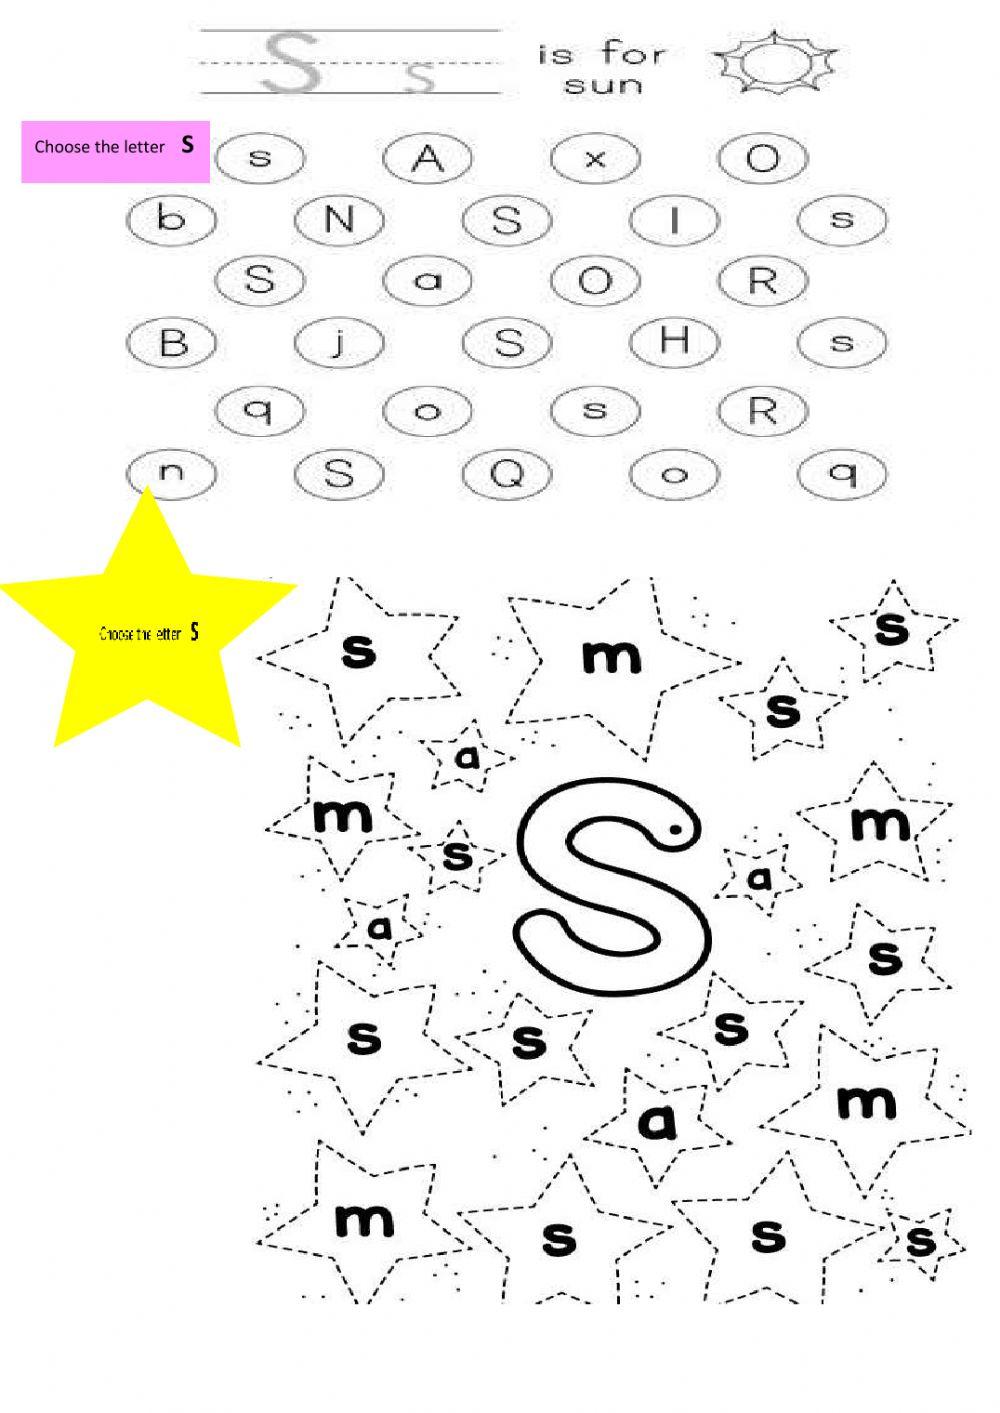 The letter S